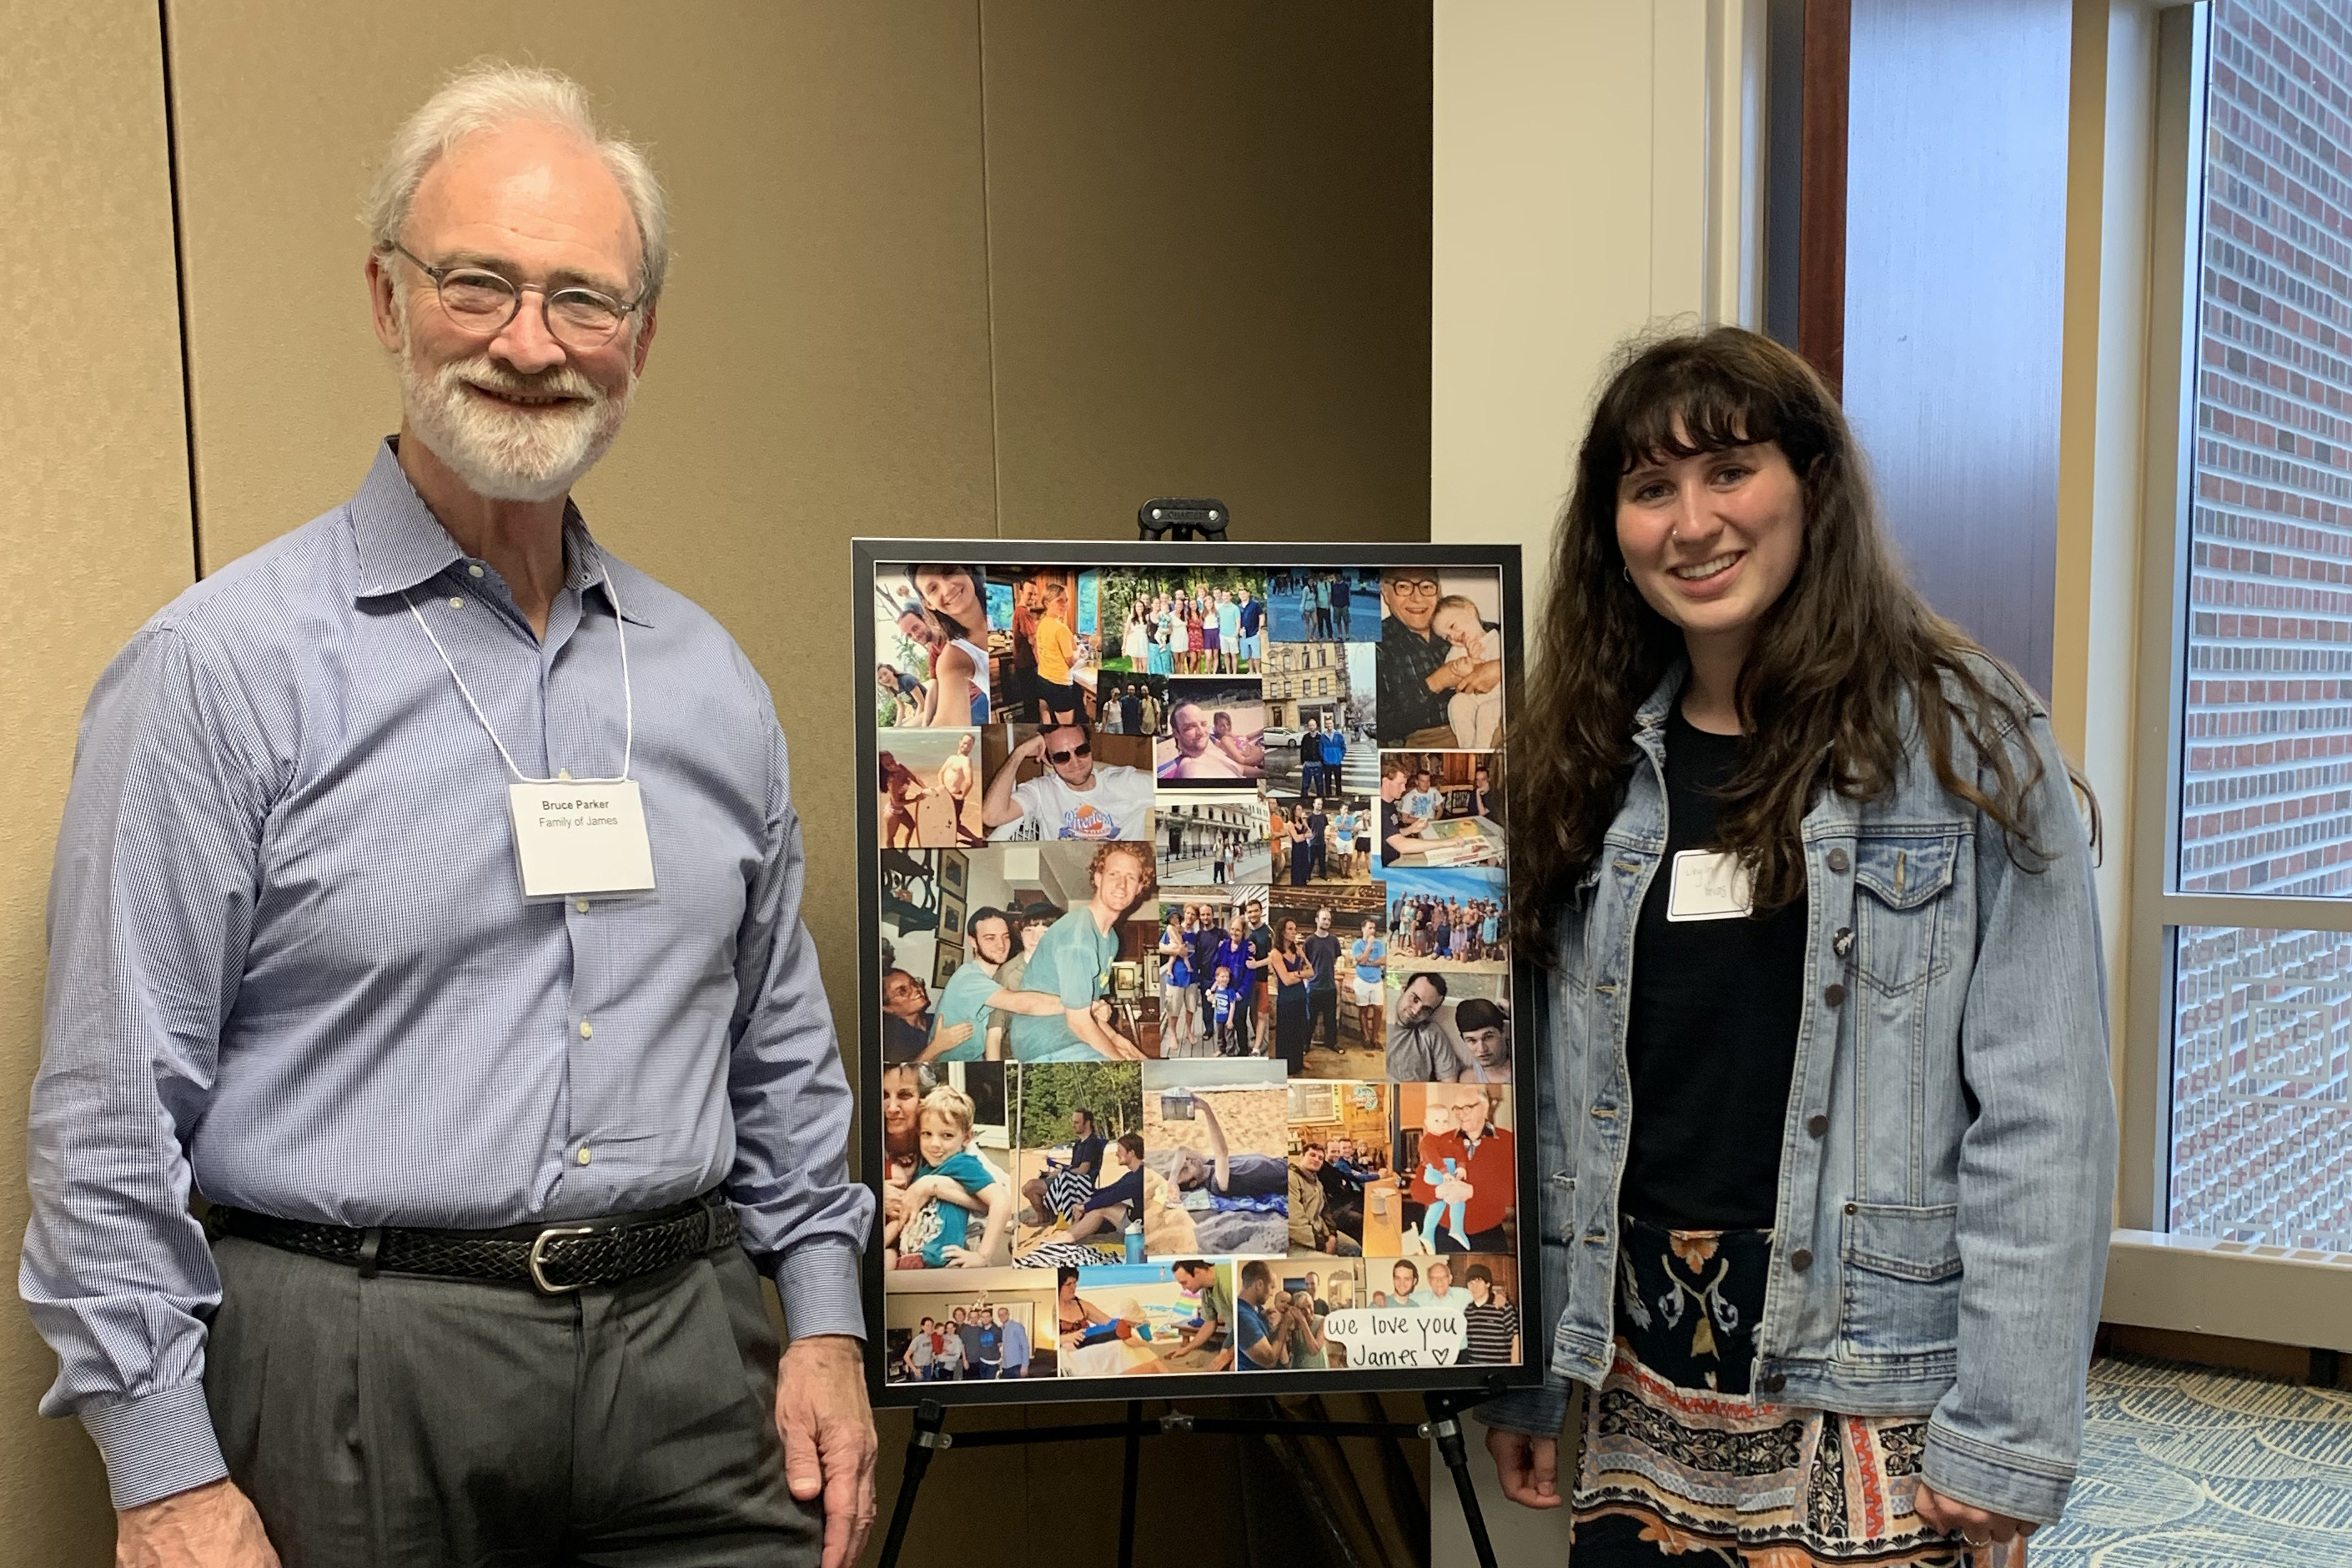 Bruce Parker and Jeylin Yavas pose with photo collage of James Parker